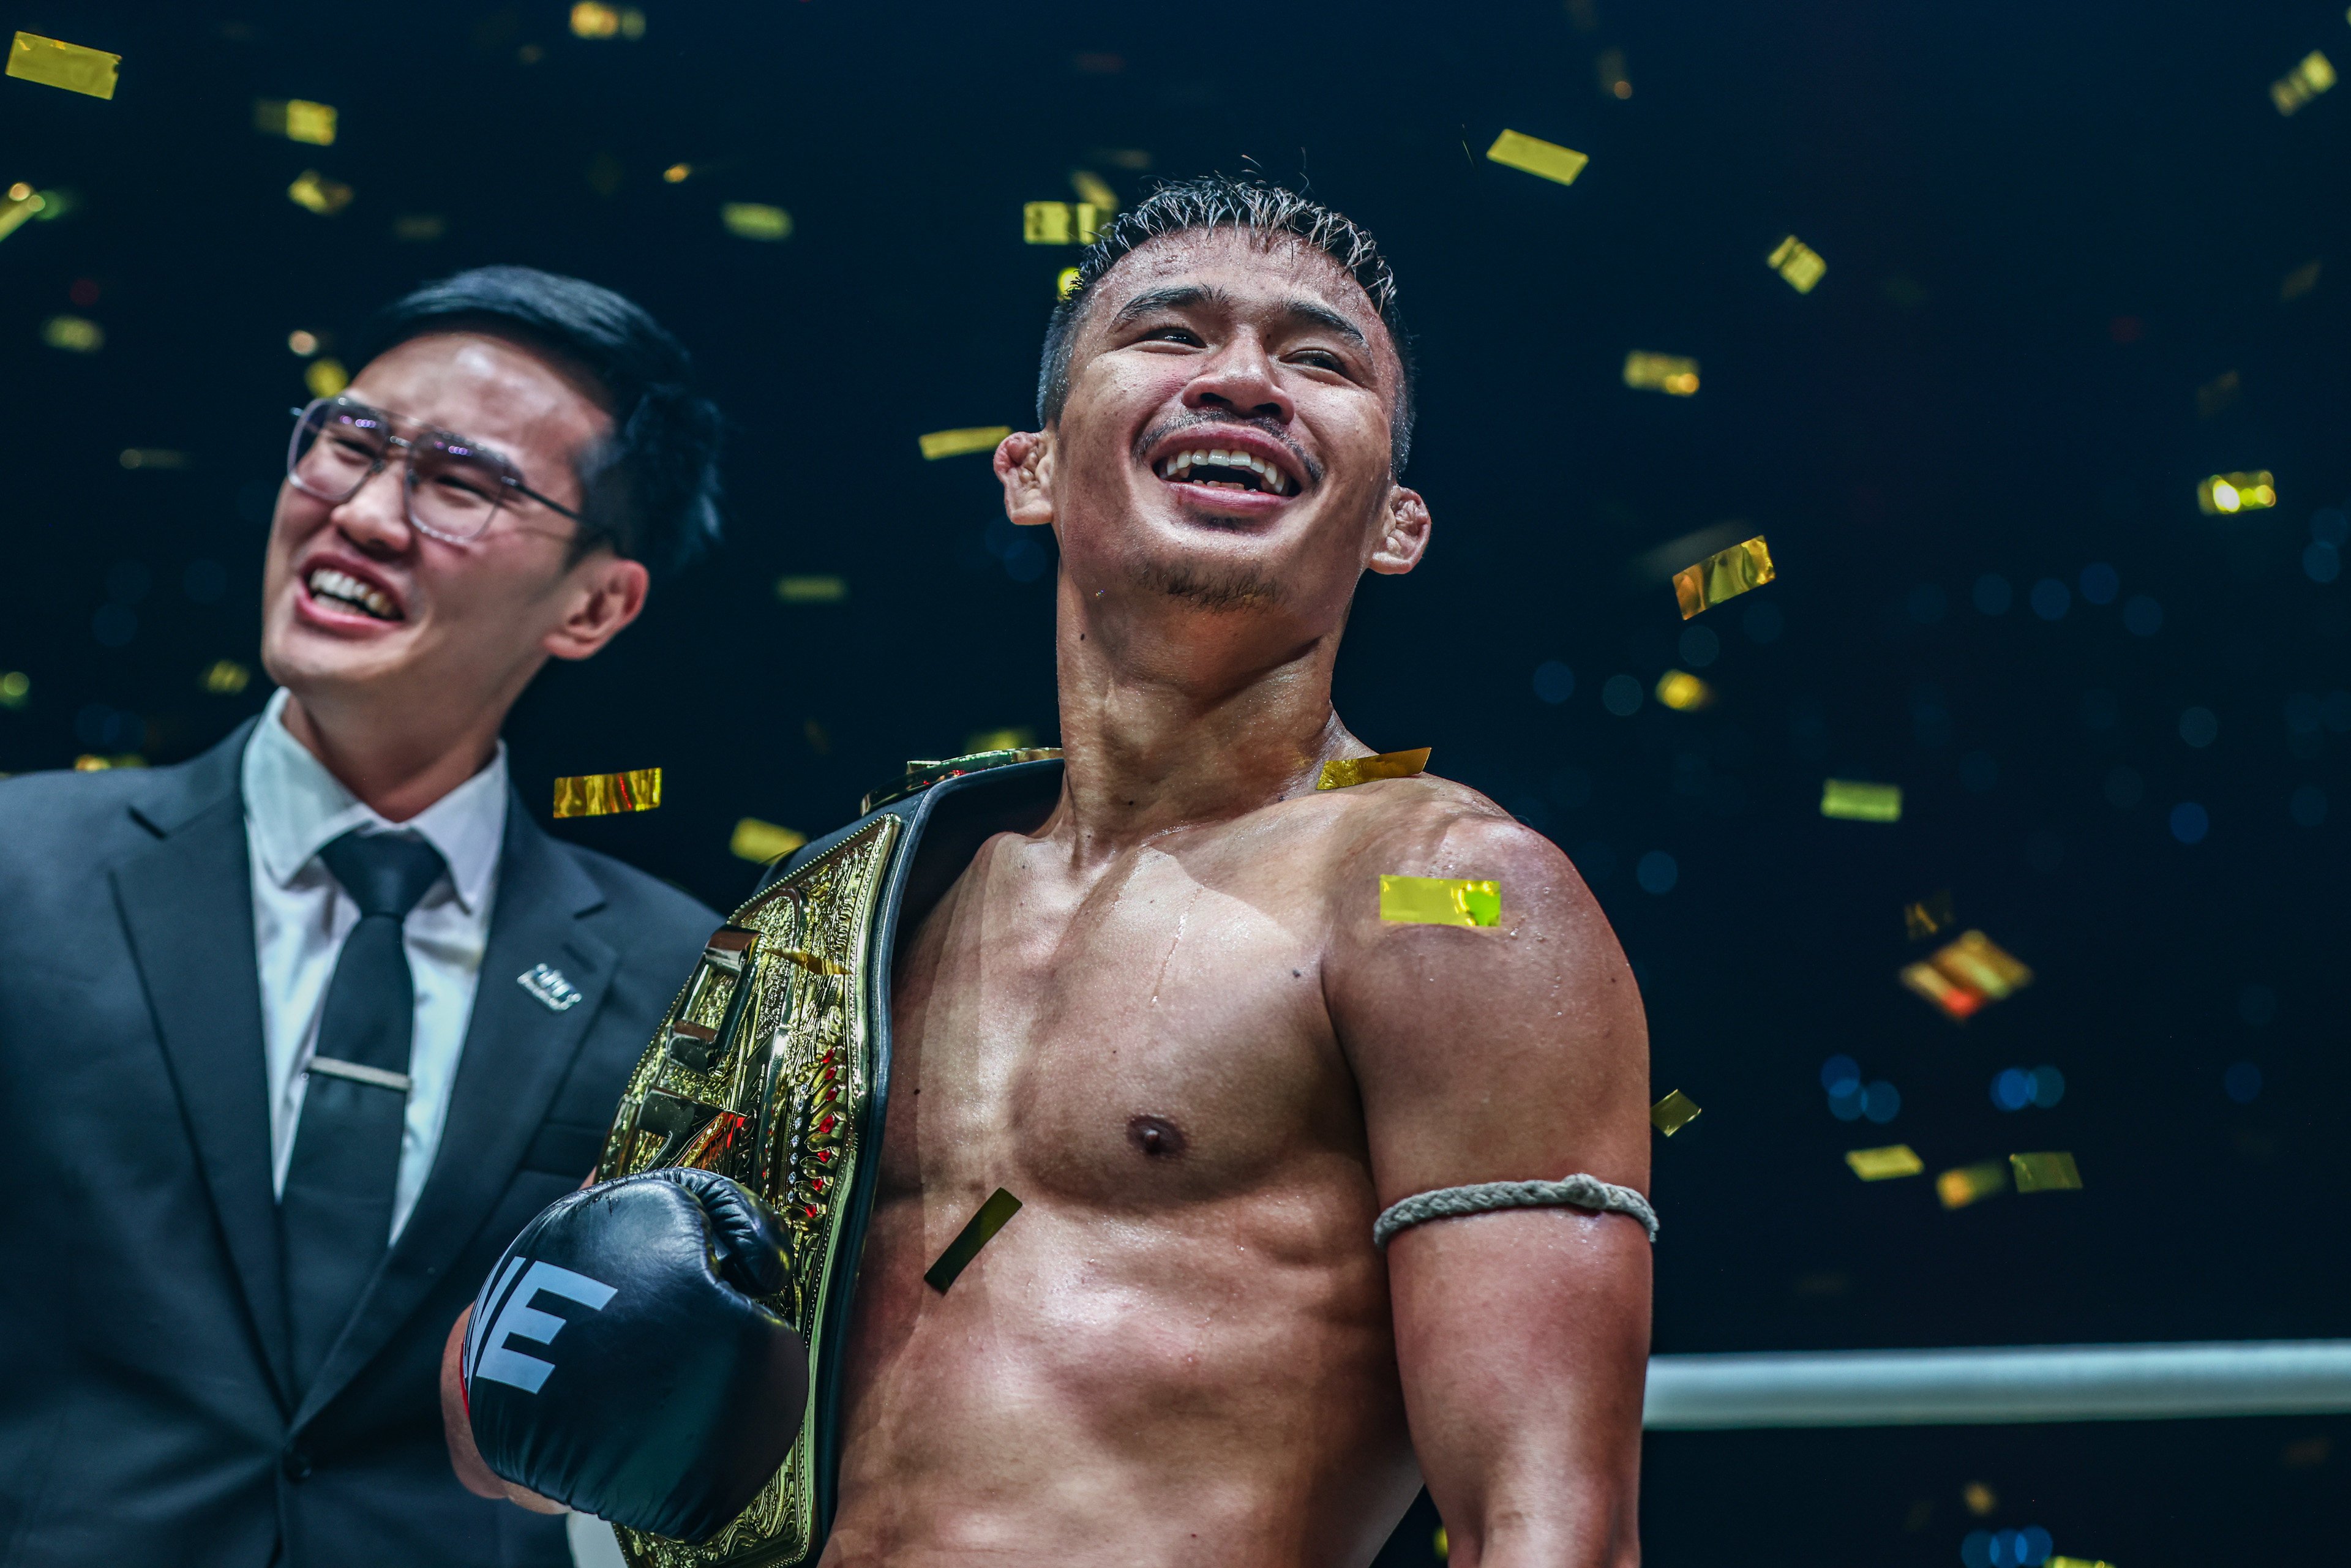 Superlek Kiatmoo9 celebrates after successfully defending his flyweight kickboxing title at ONE 165. Photo: ONE Championship